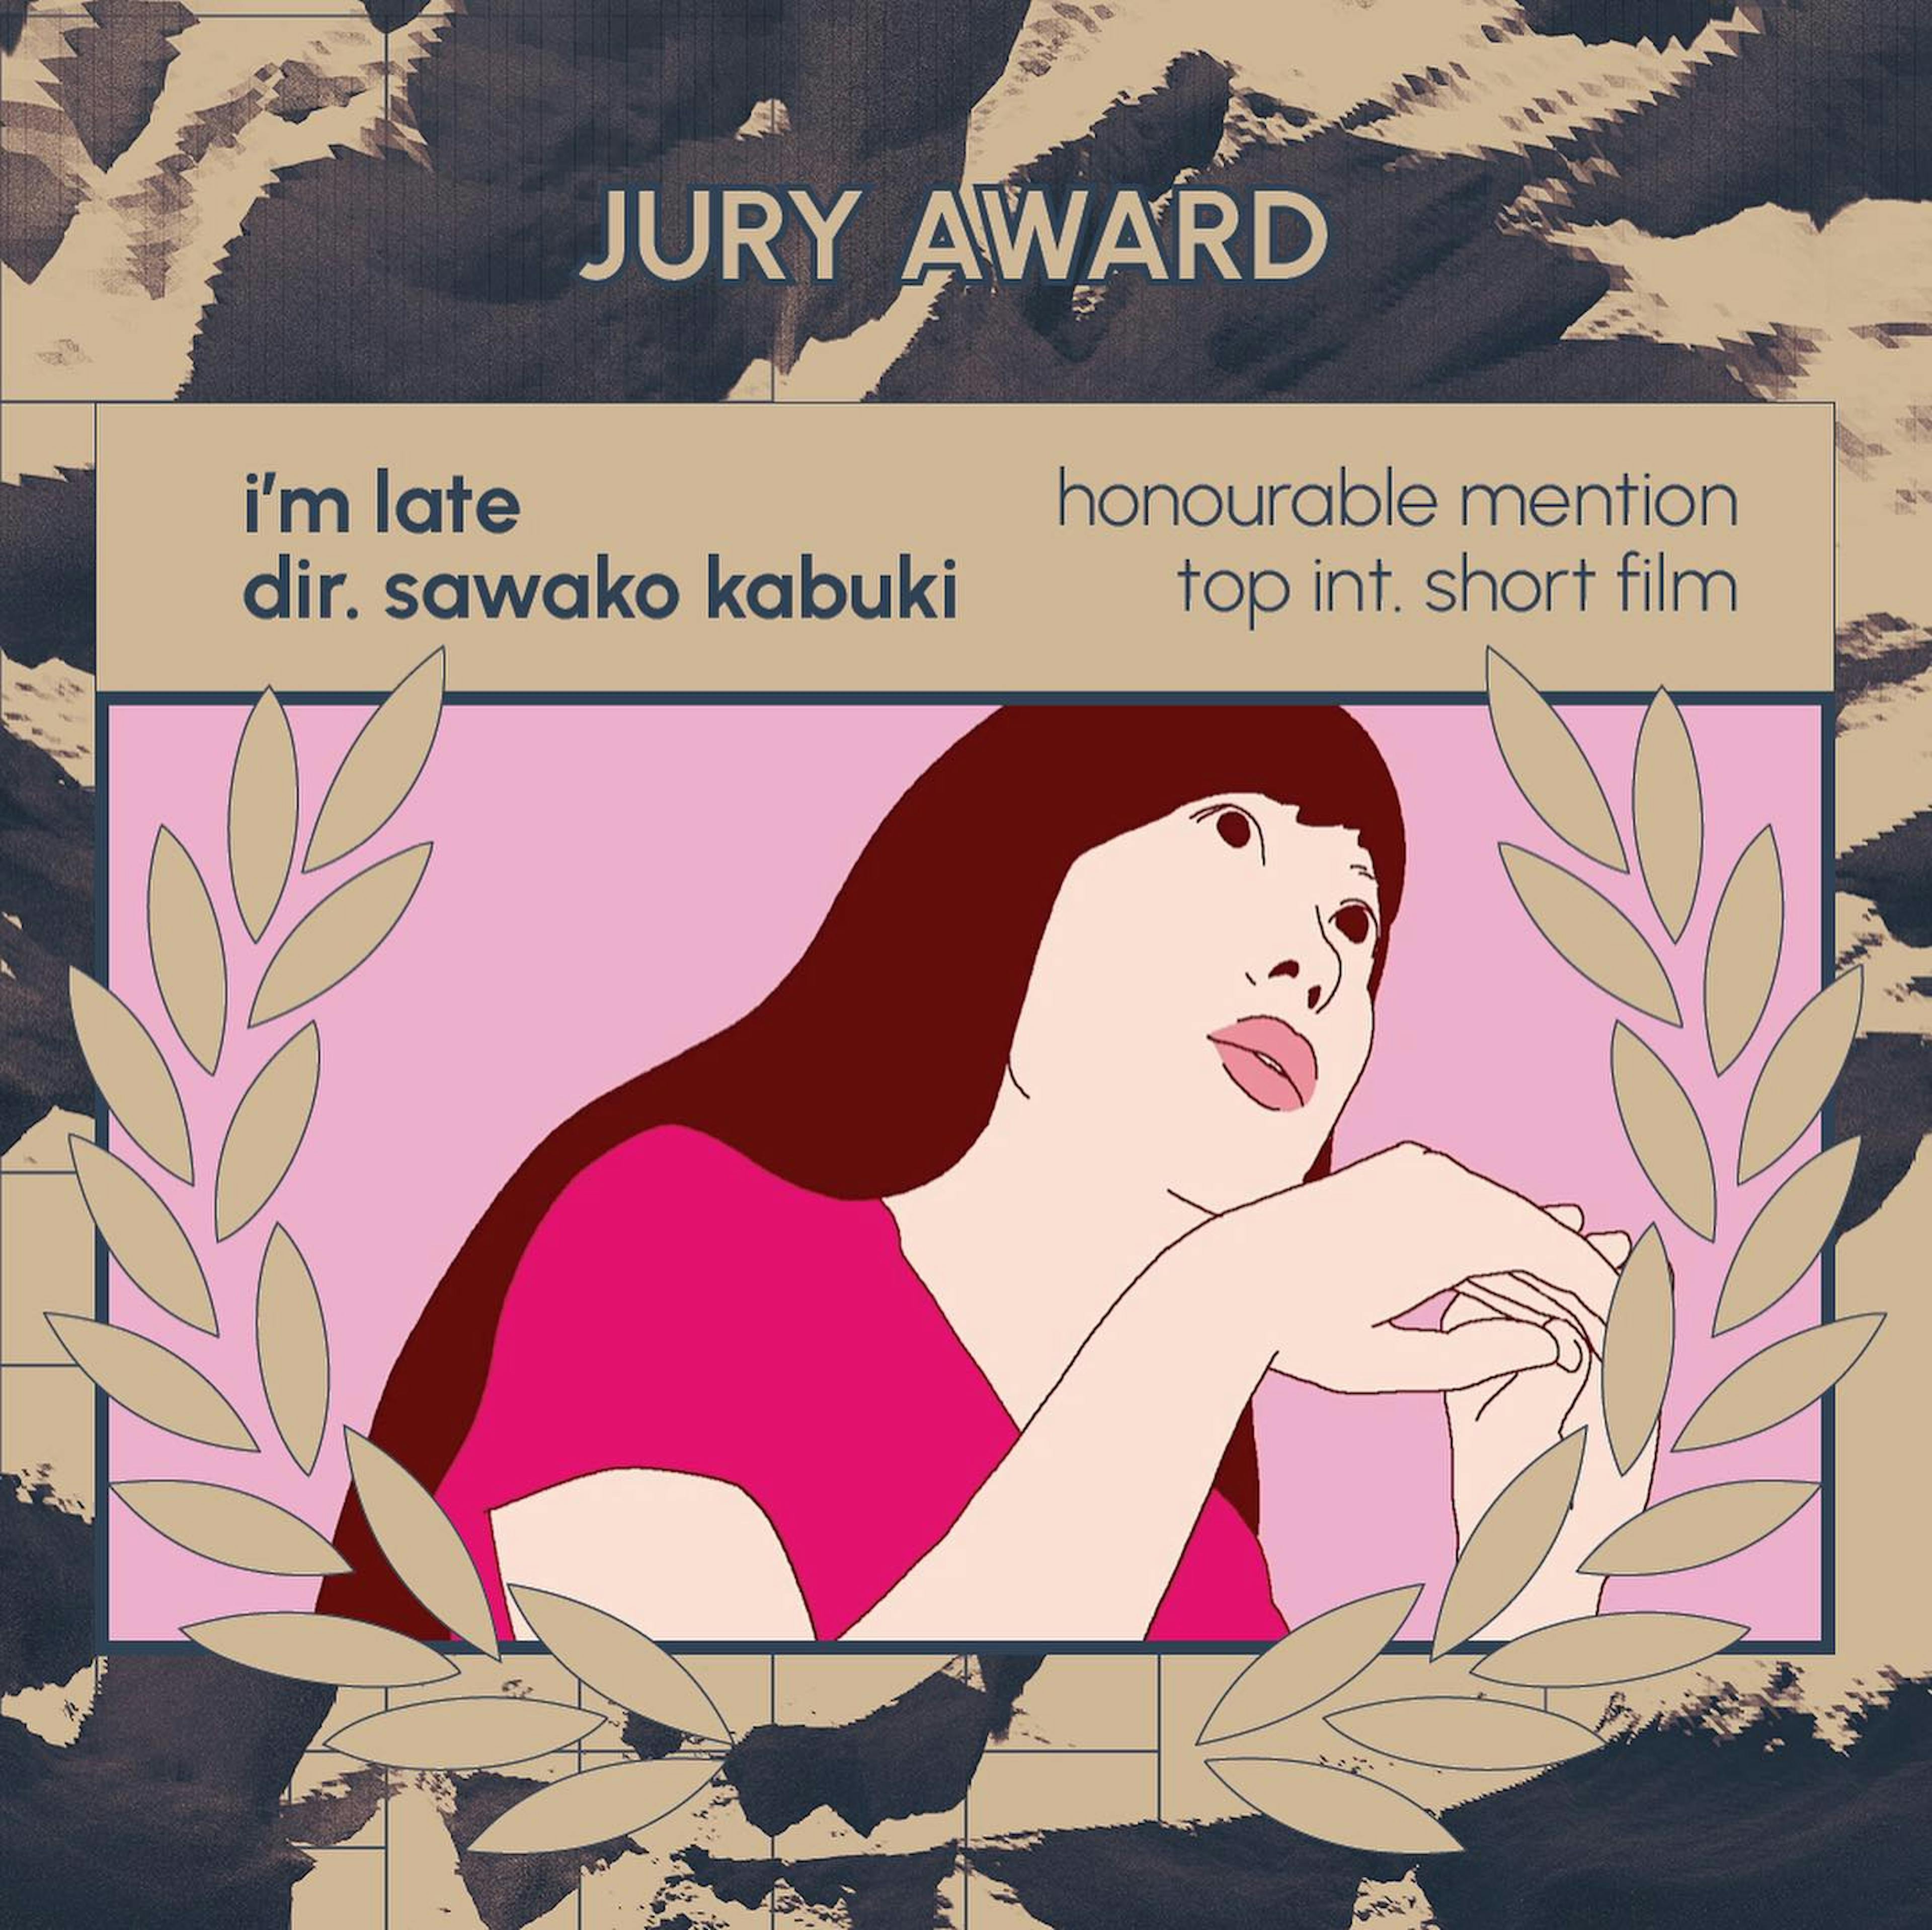 jury award giraf19
honourable mention top int. short film
i'm late
dir. sawako kabuki

screenshot shows a woman looking to the top right of the frame. She has long hair and is wearing a pink t shirt